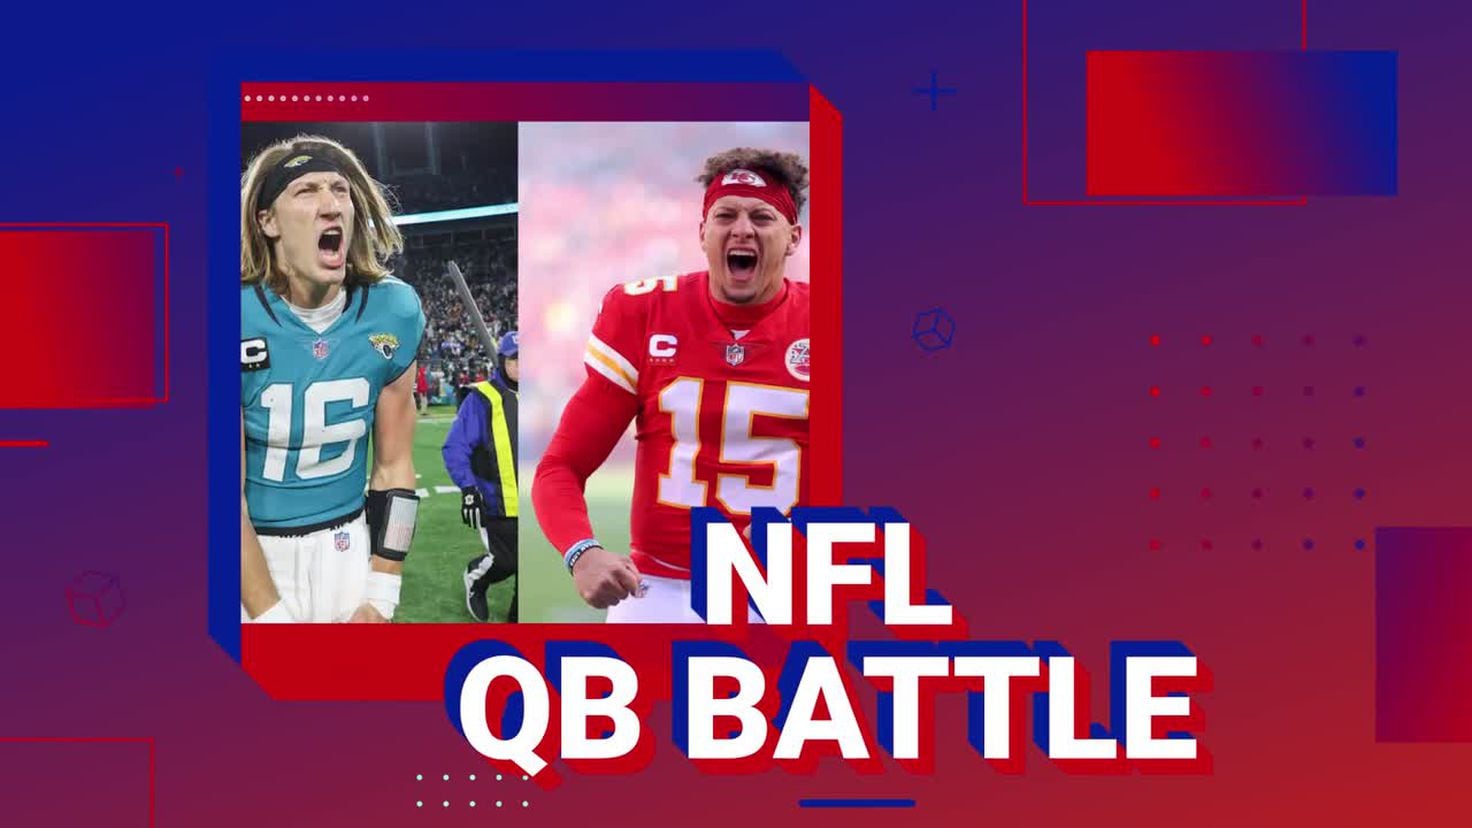 PATRICK MAHOMES AND CHIEFS HOST TREVOR LAWRENCE AND JAGUARS IN AFC